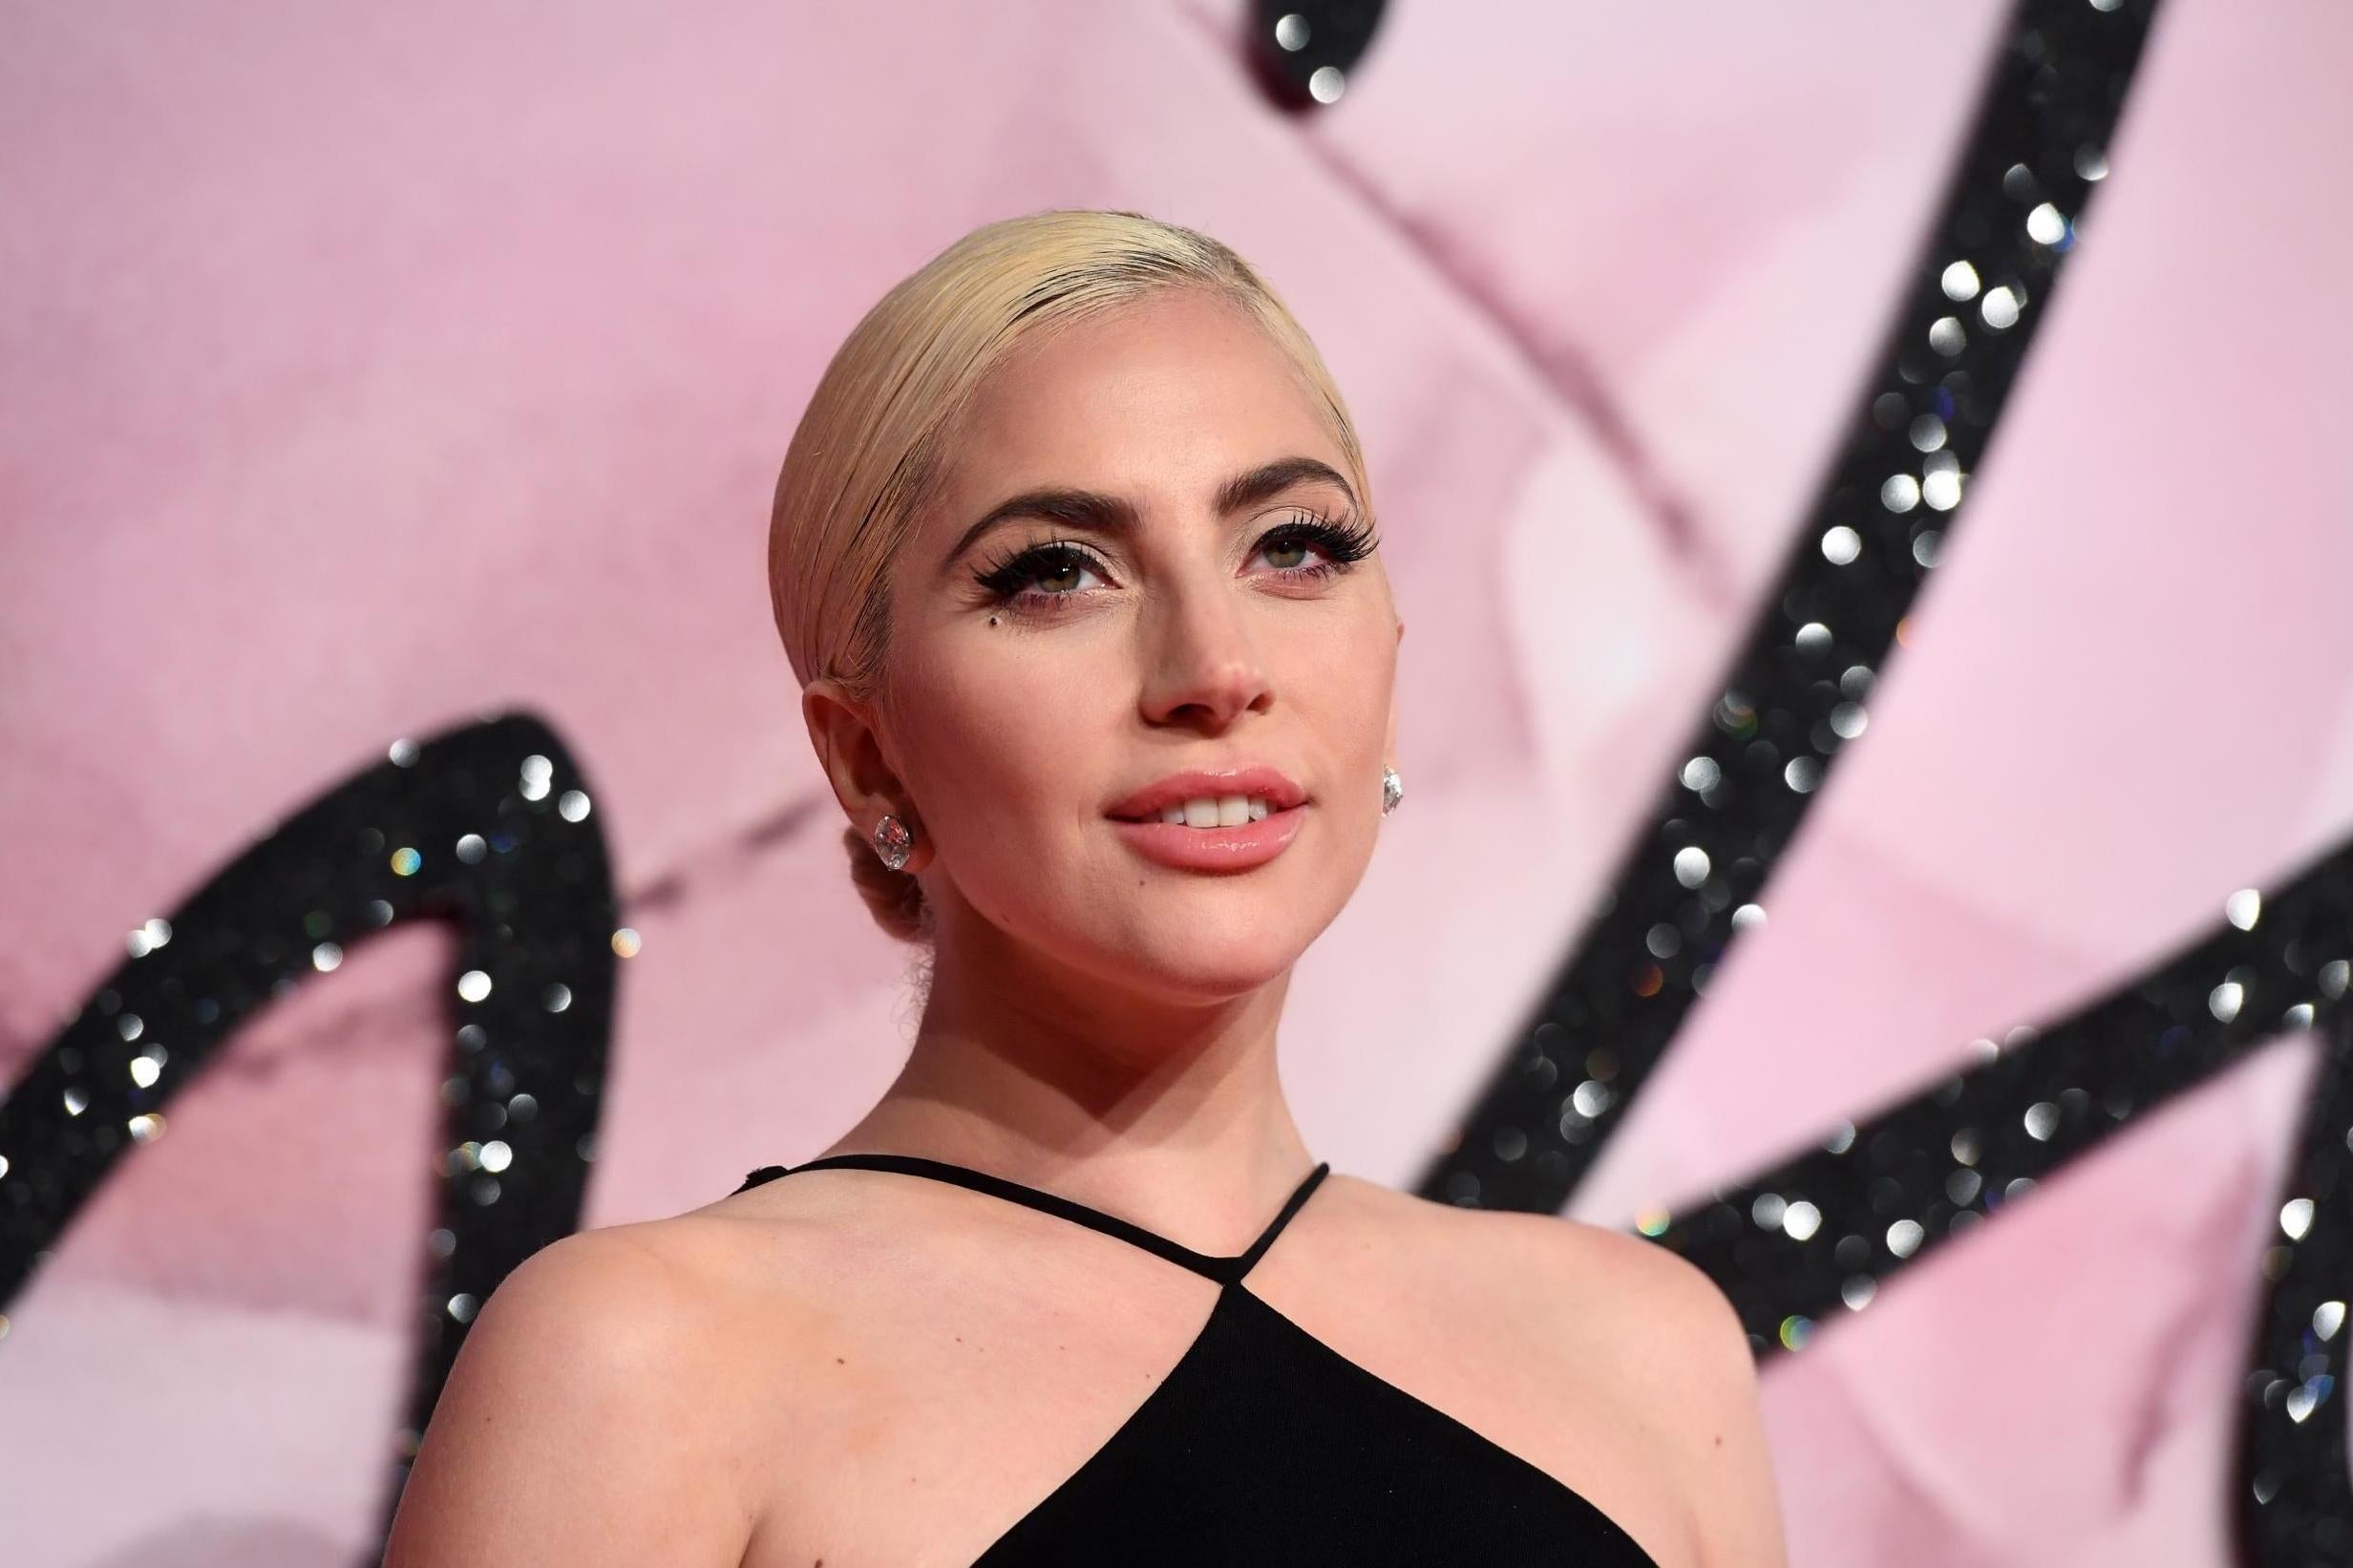 Lady Gaga opens up about relationship with Bradley Cooper: 'We wanted people to believe that we were in love'